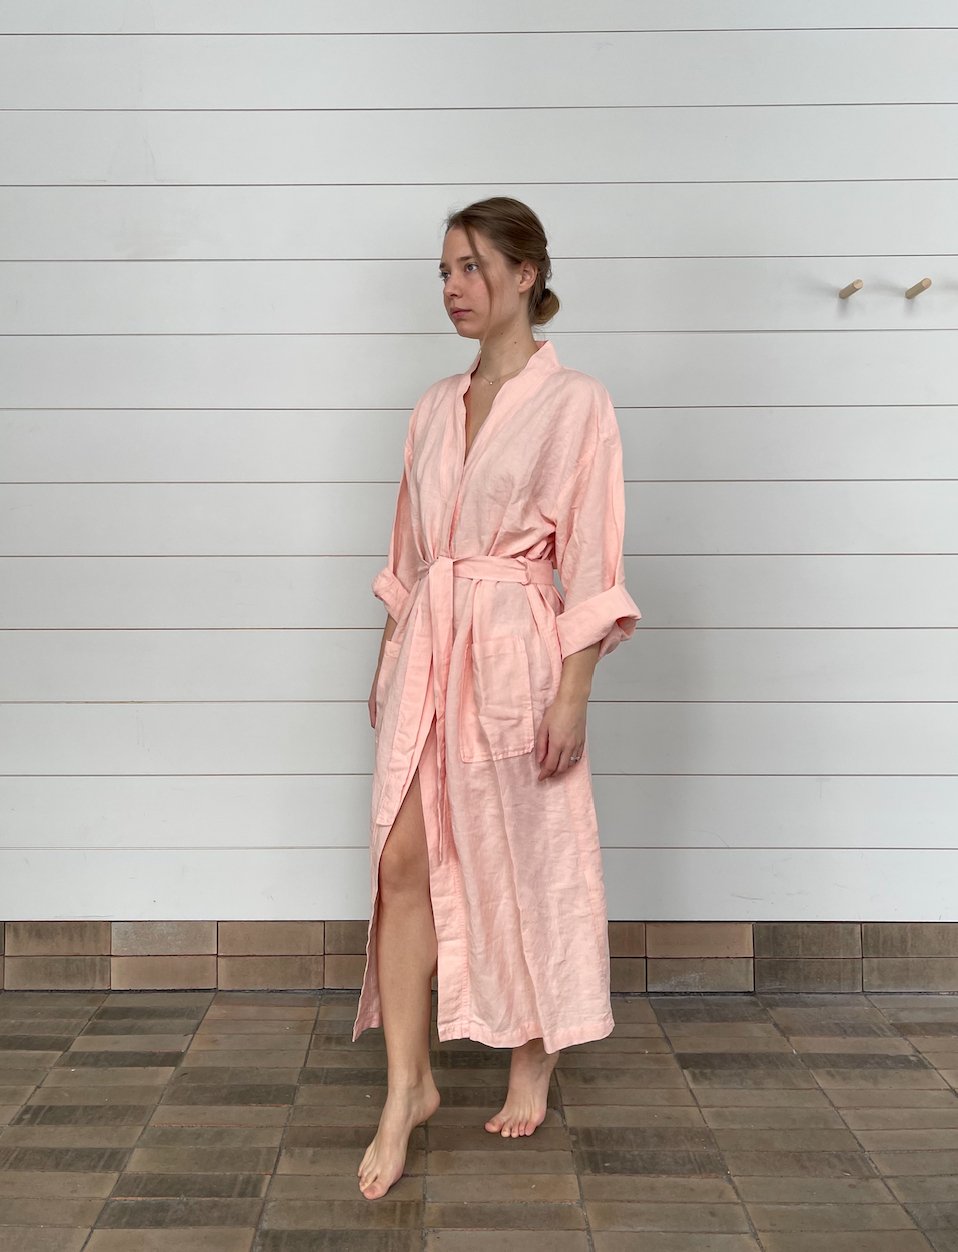 SOFT PINK LINEN BATHROBE KIMONO living-homeaccents onesky Soft Pink S\M IN STOCK